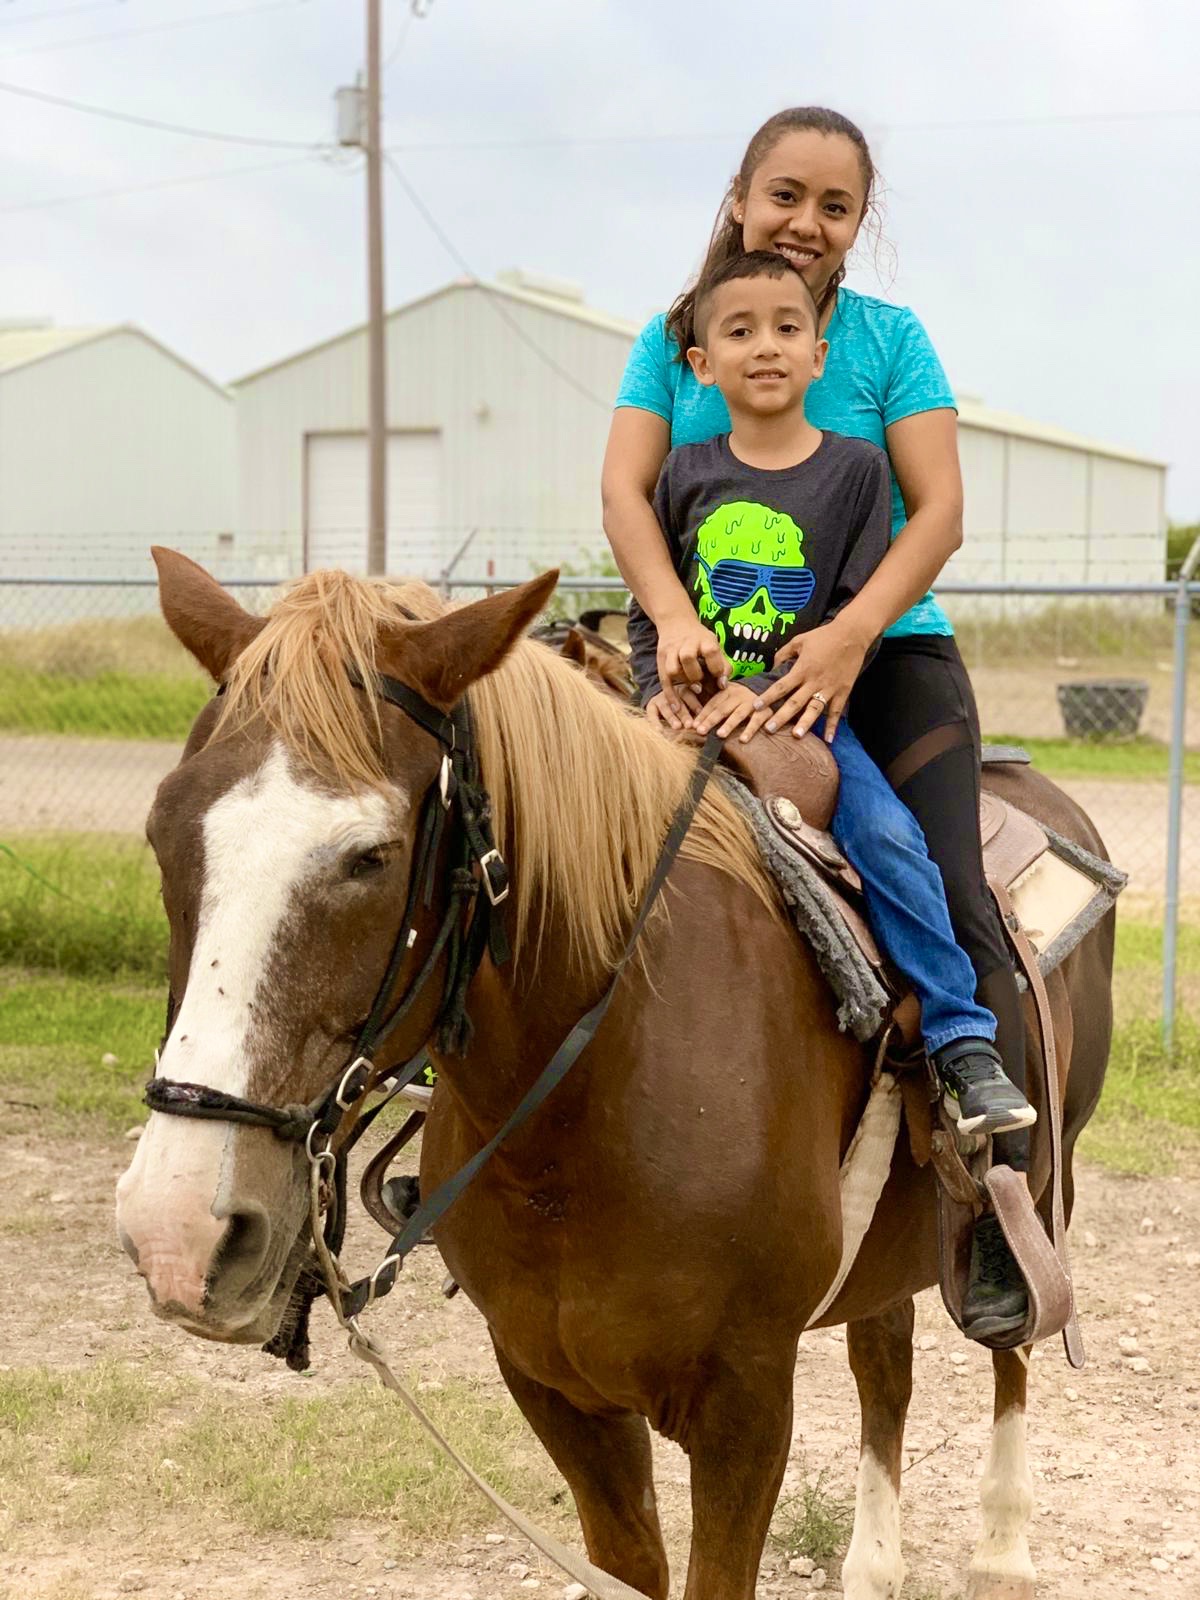 Mom and Son on a Horse